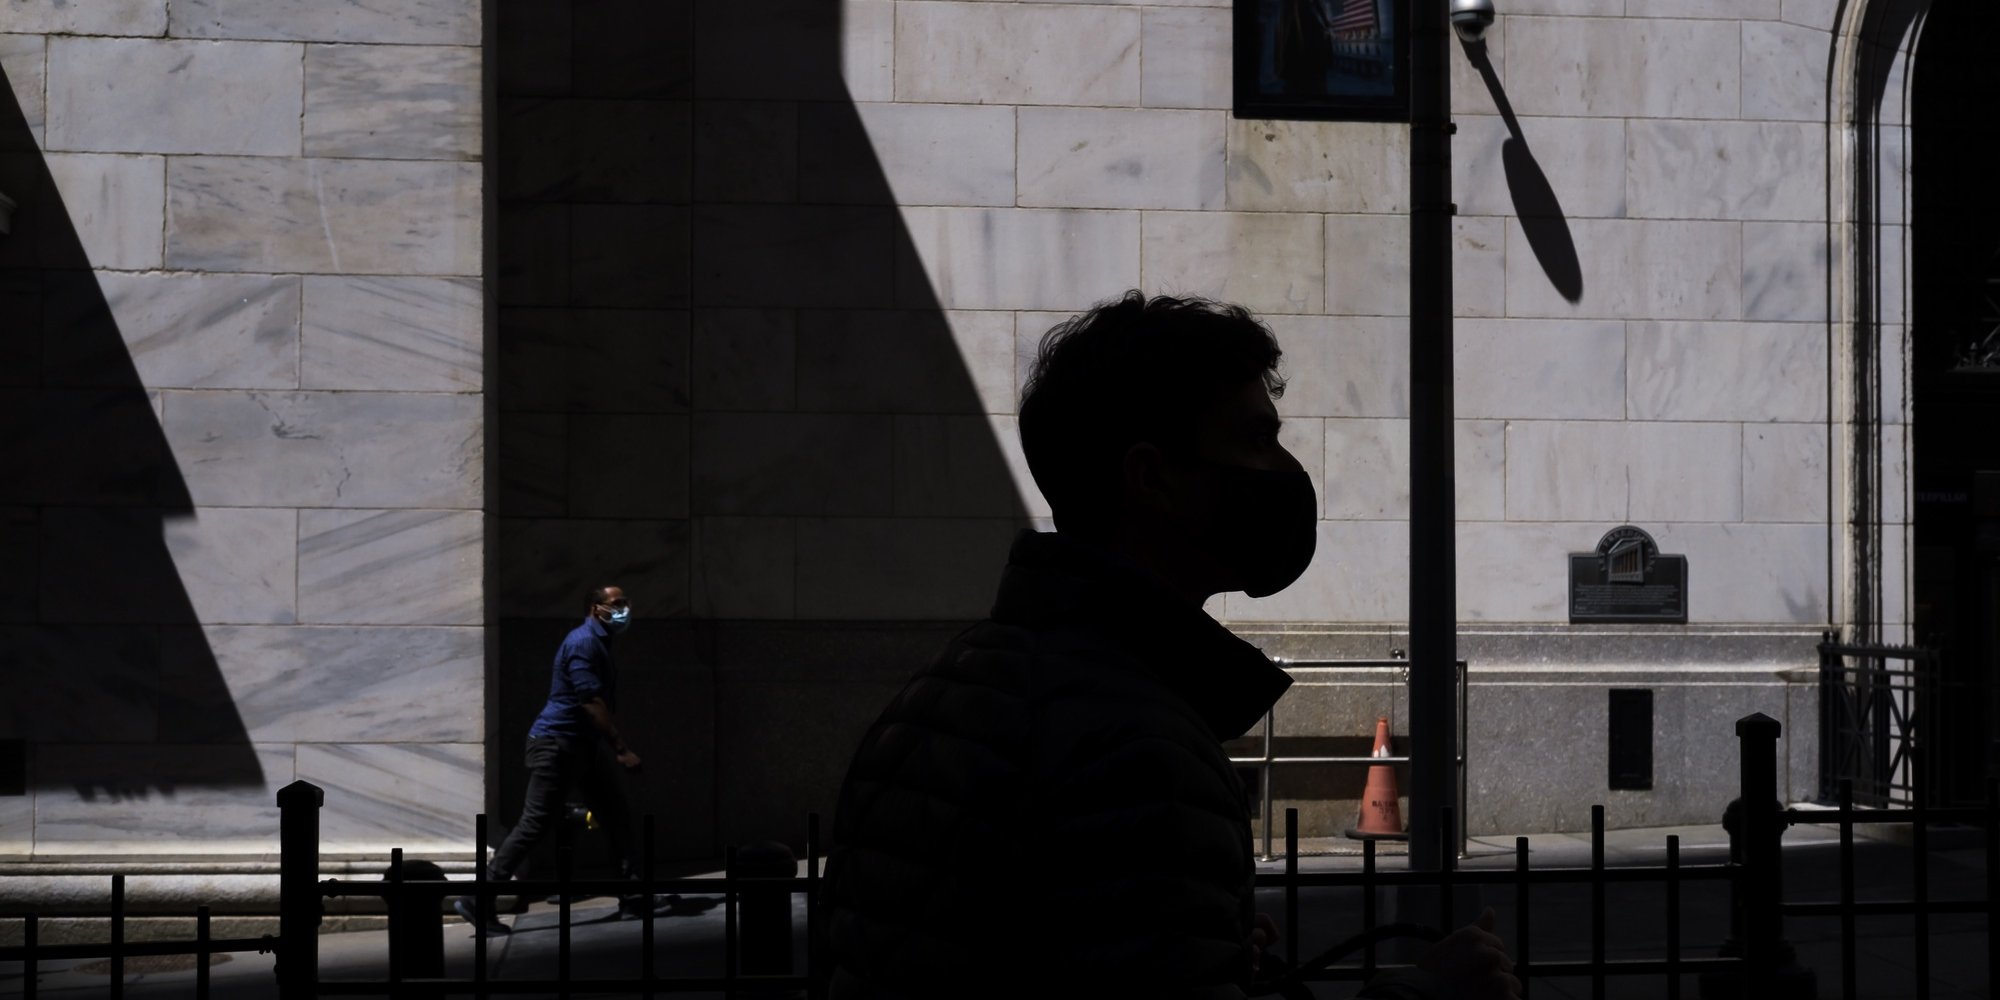 epa09162377 A person walks by the New York Stock Exchange in New York, New York, USA, 26 April 2021.  EPA/JUSTIN LANE